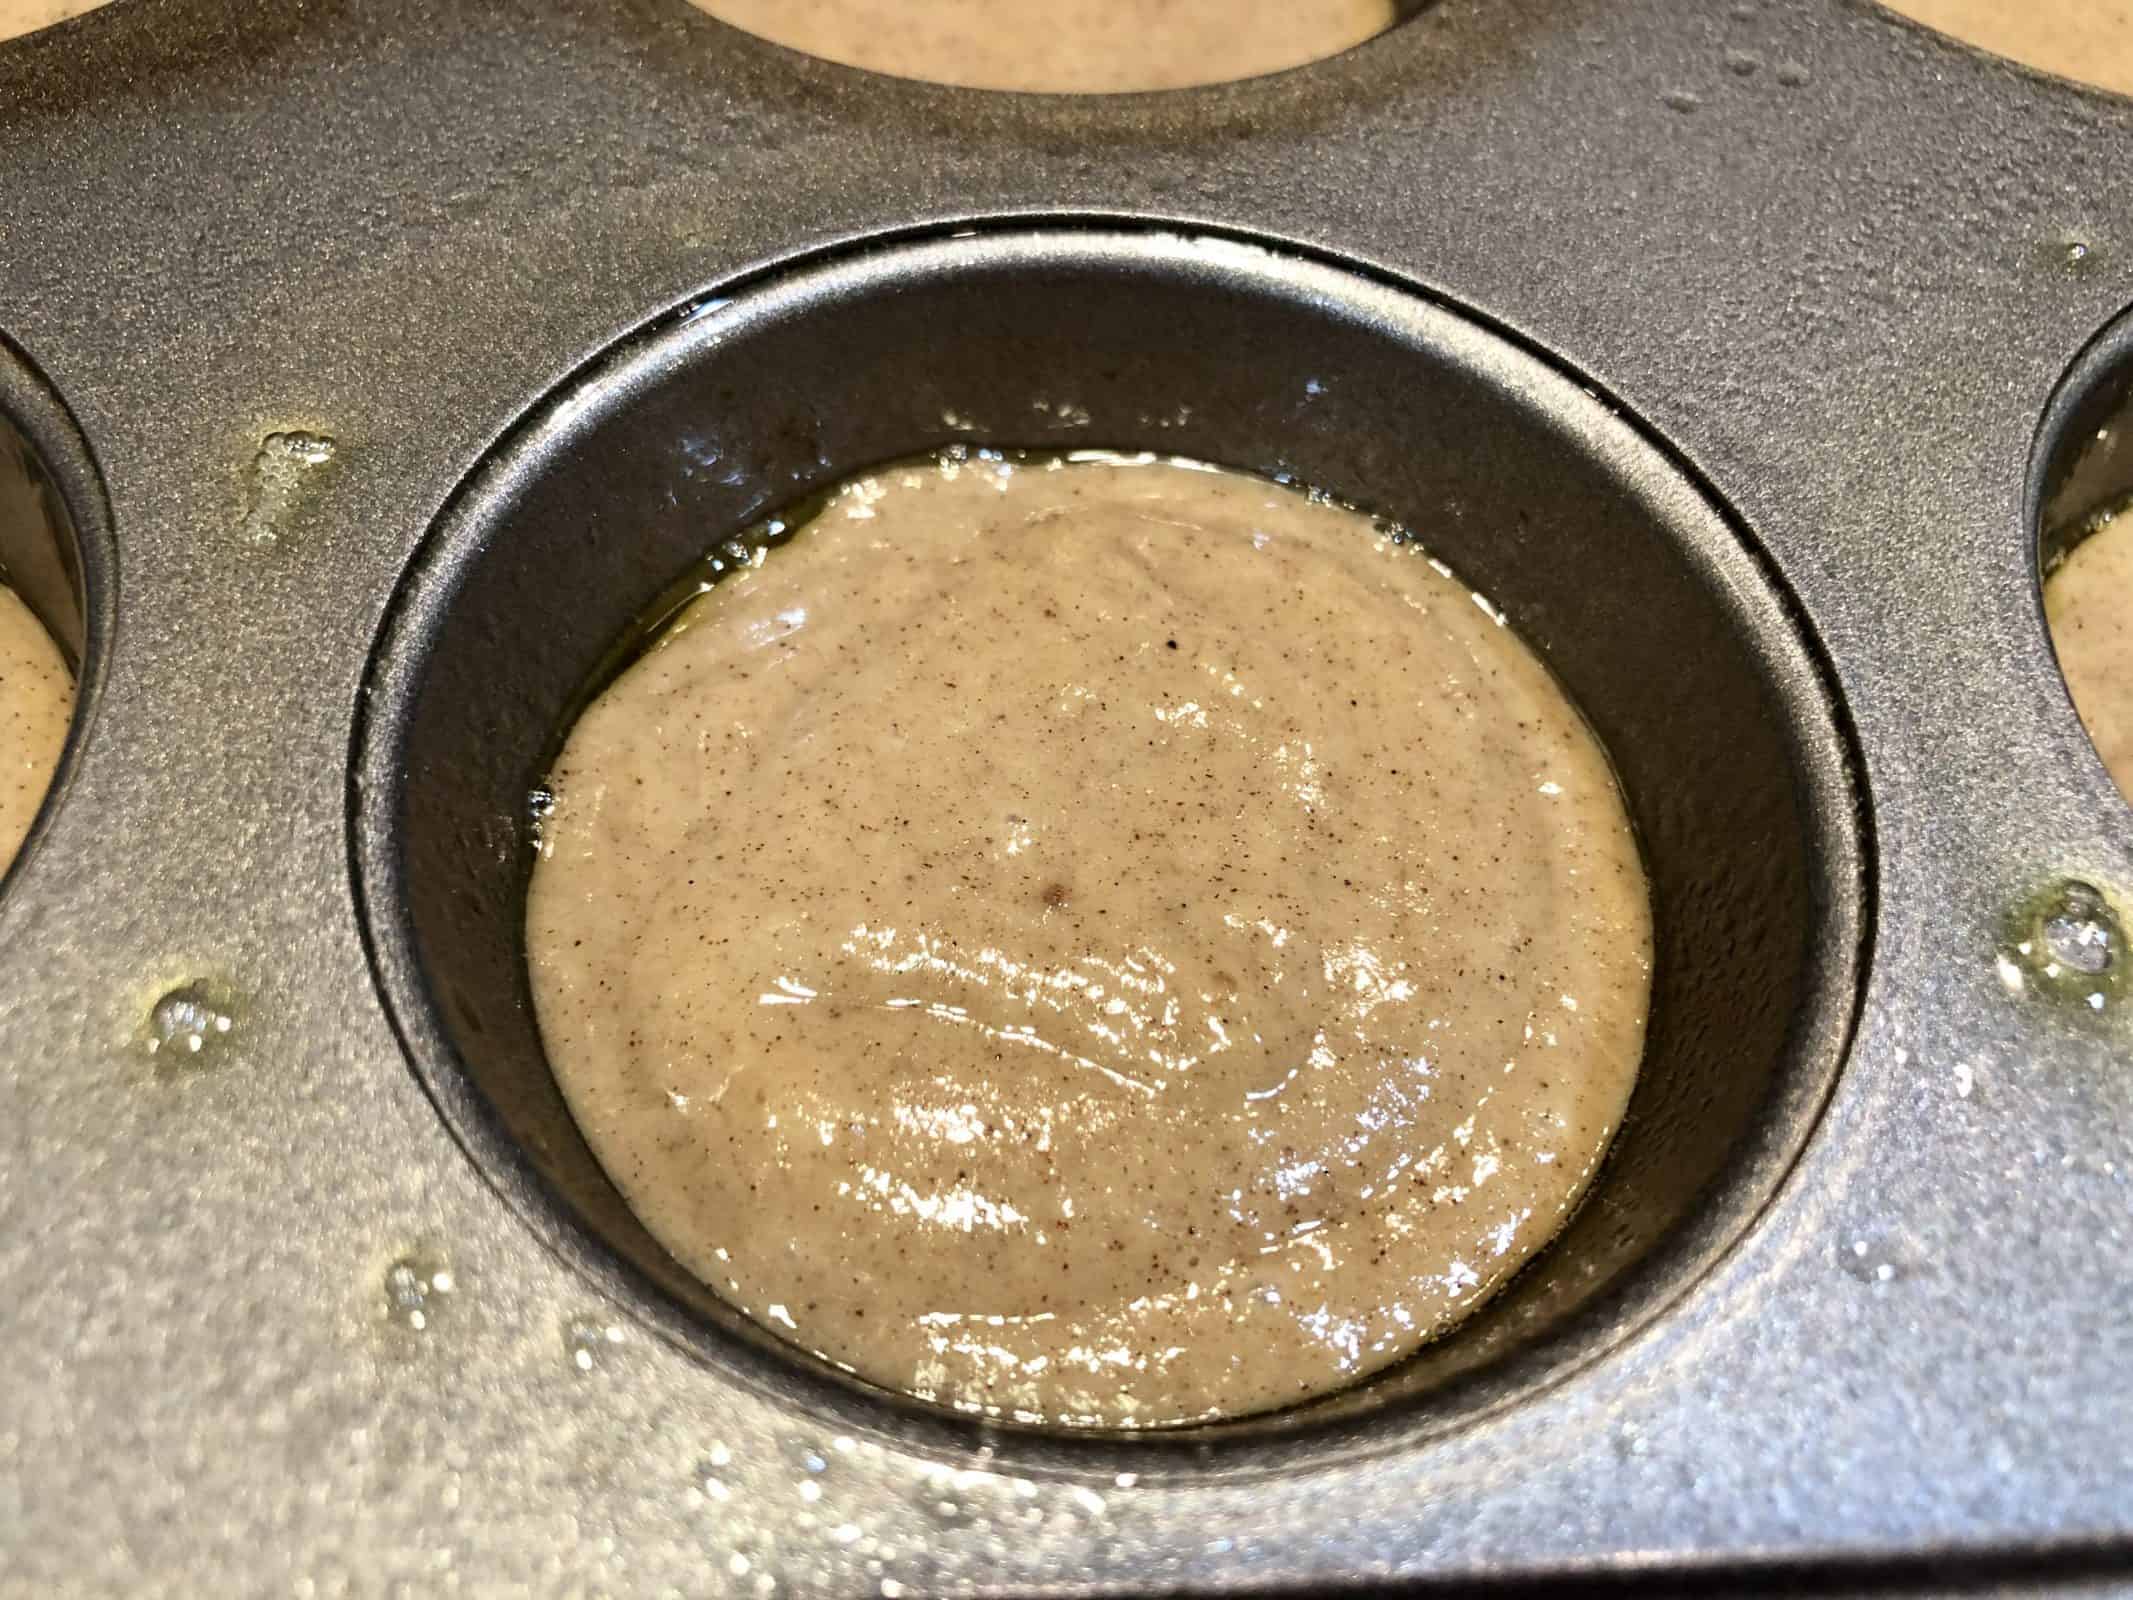 Muffin Batter in the Pan